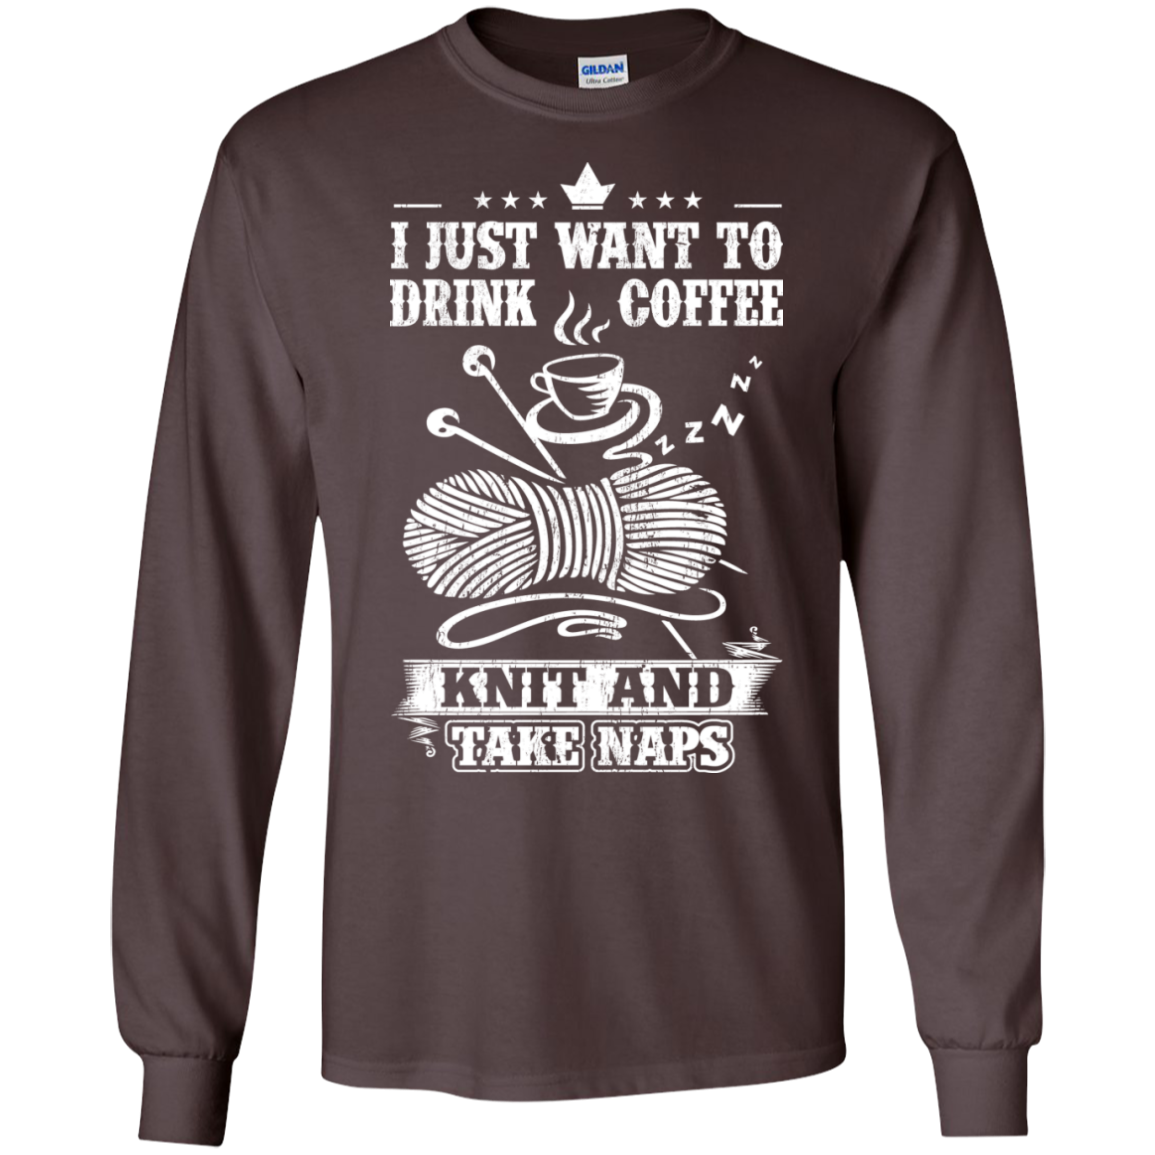 Coffee-Knit-Nap Long Sleeve Ultra Cotton T-Shirt - Crafter4Life - 2